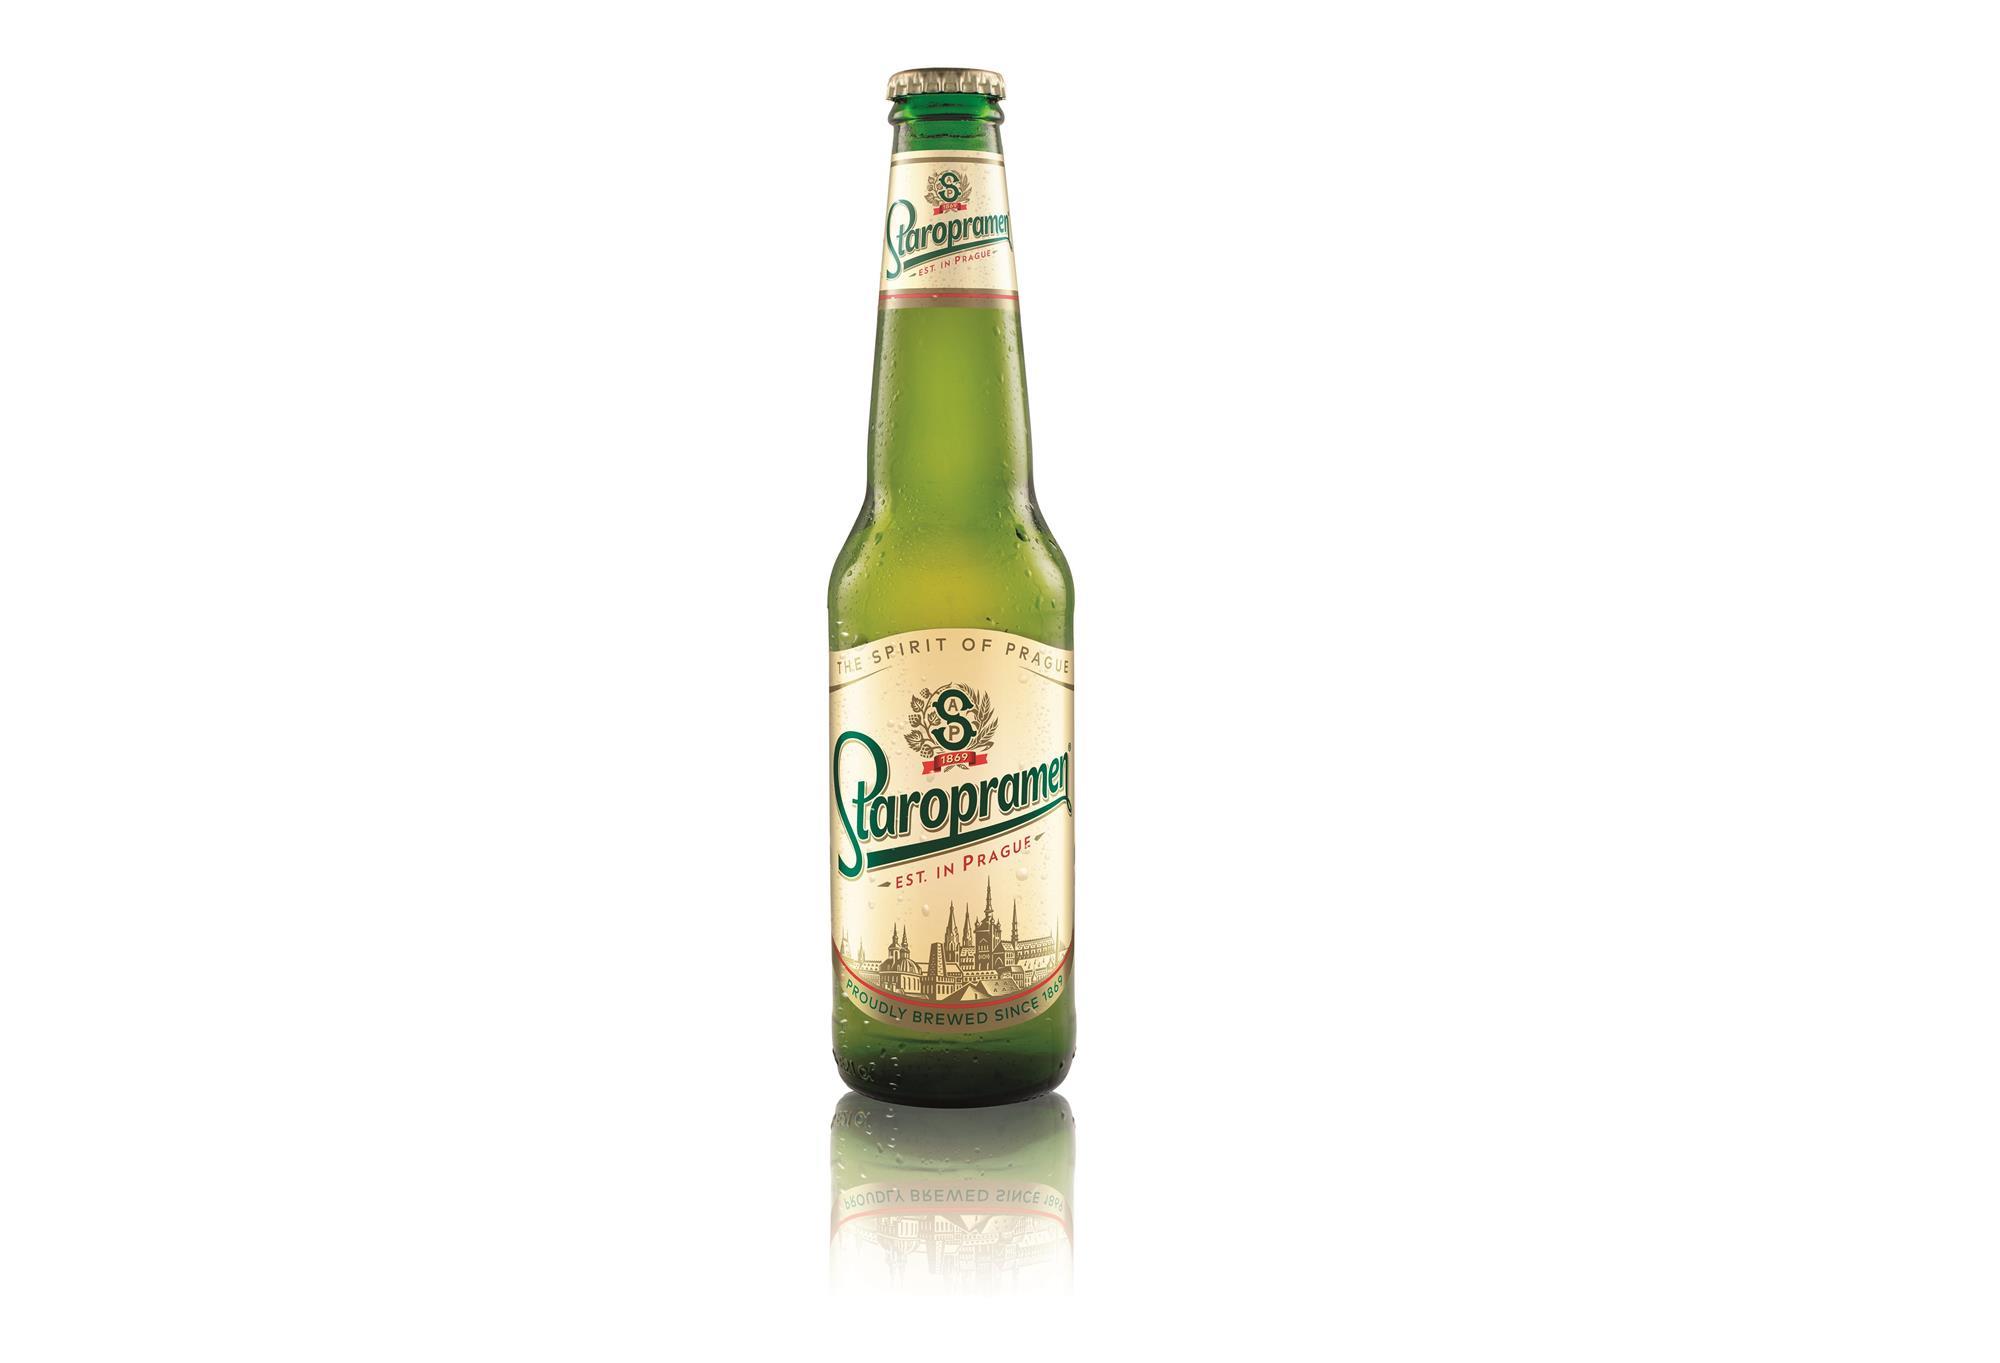 Staropramen beer refreshed | Product News | Convenience Store